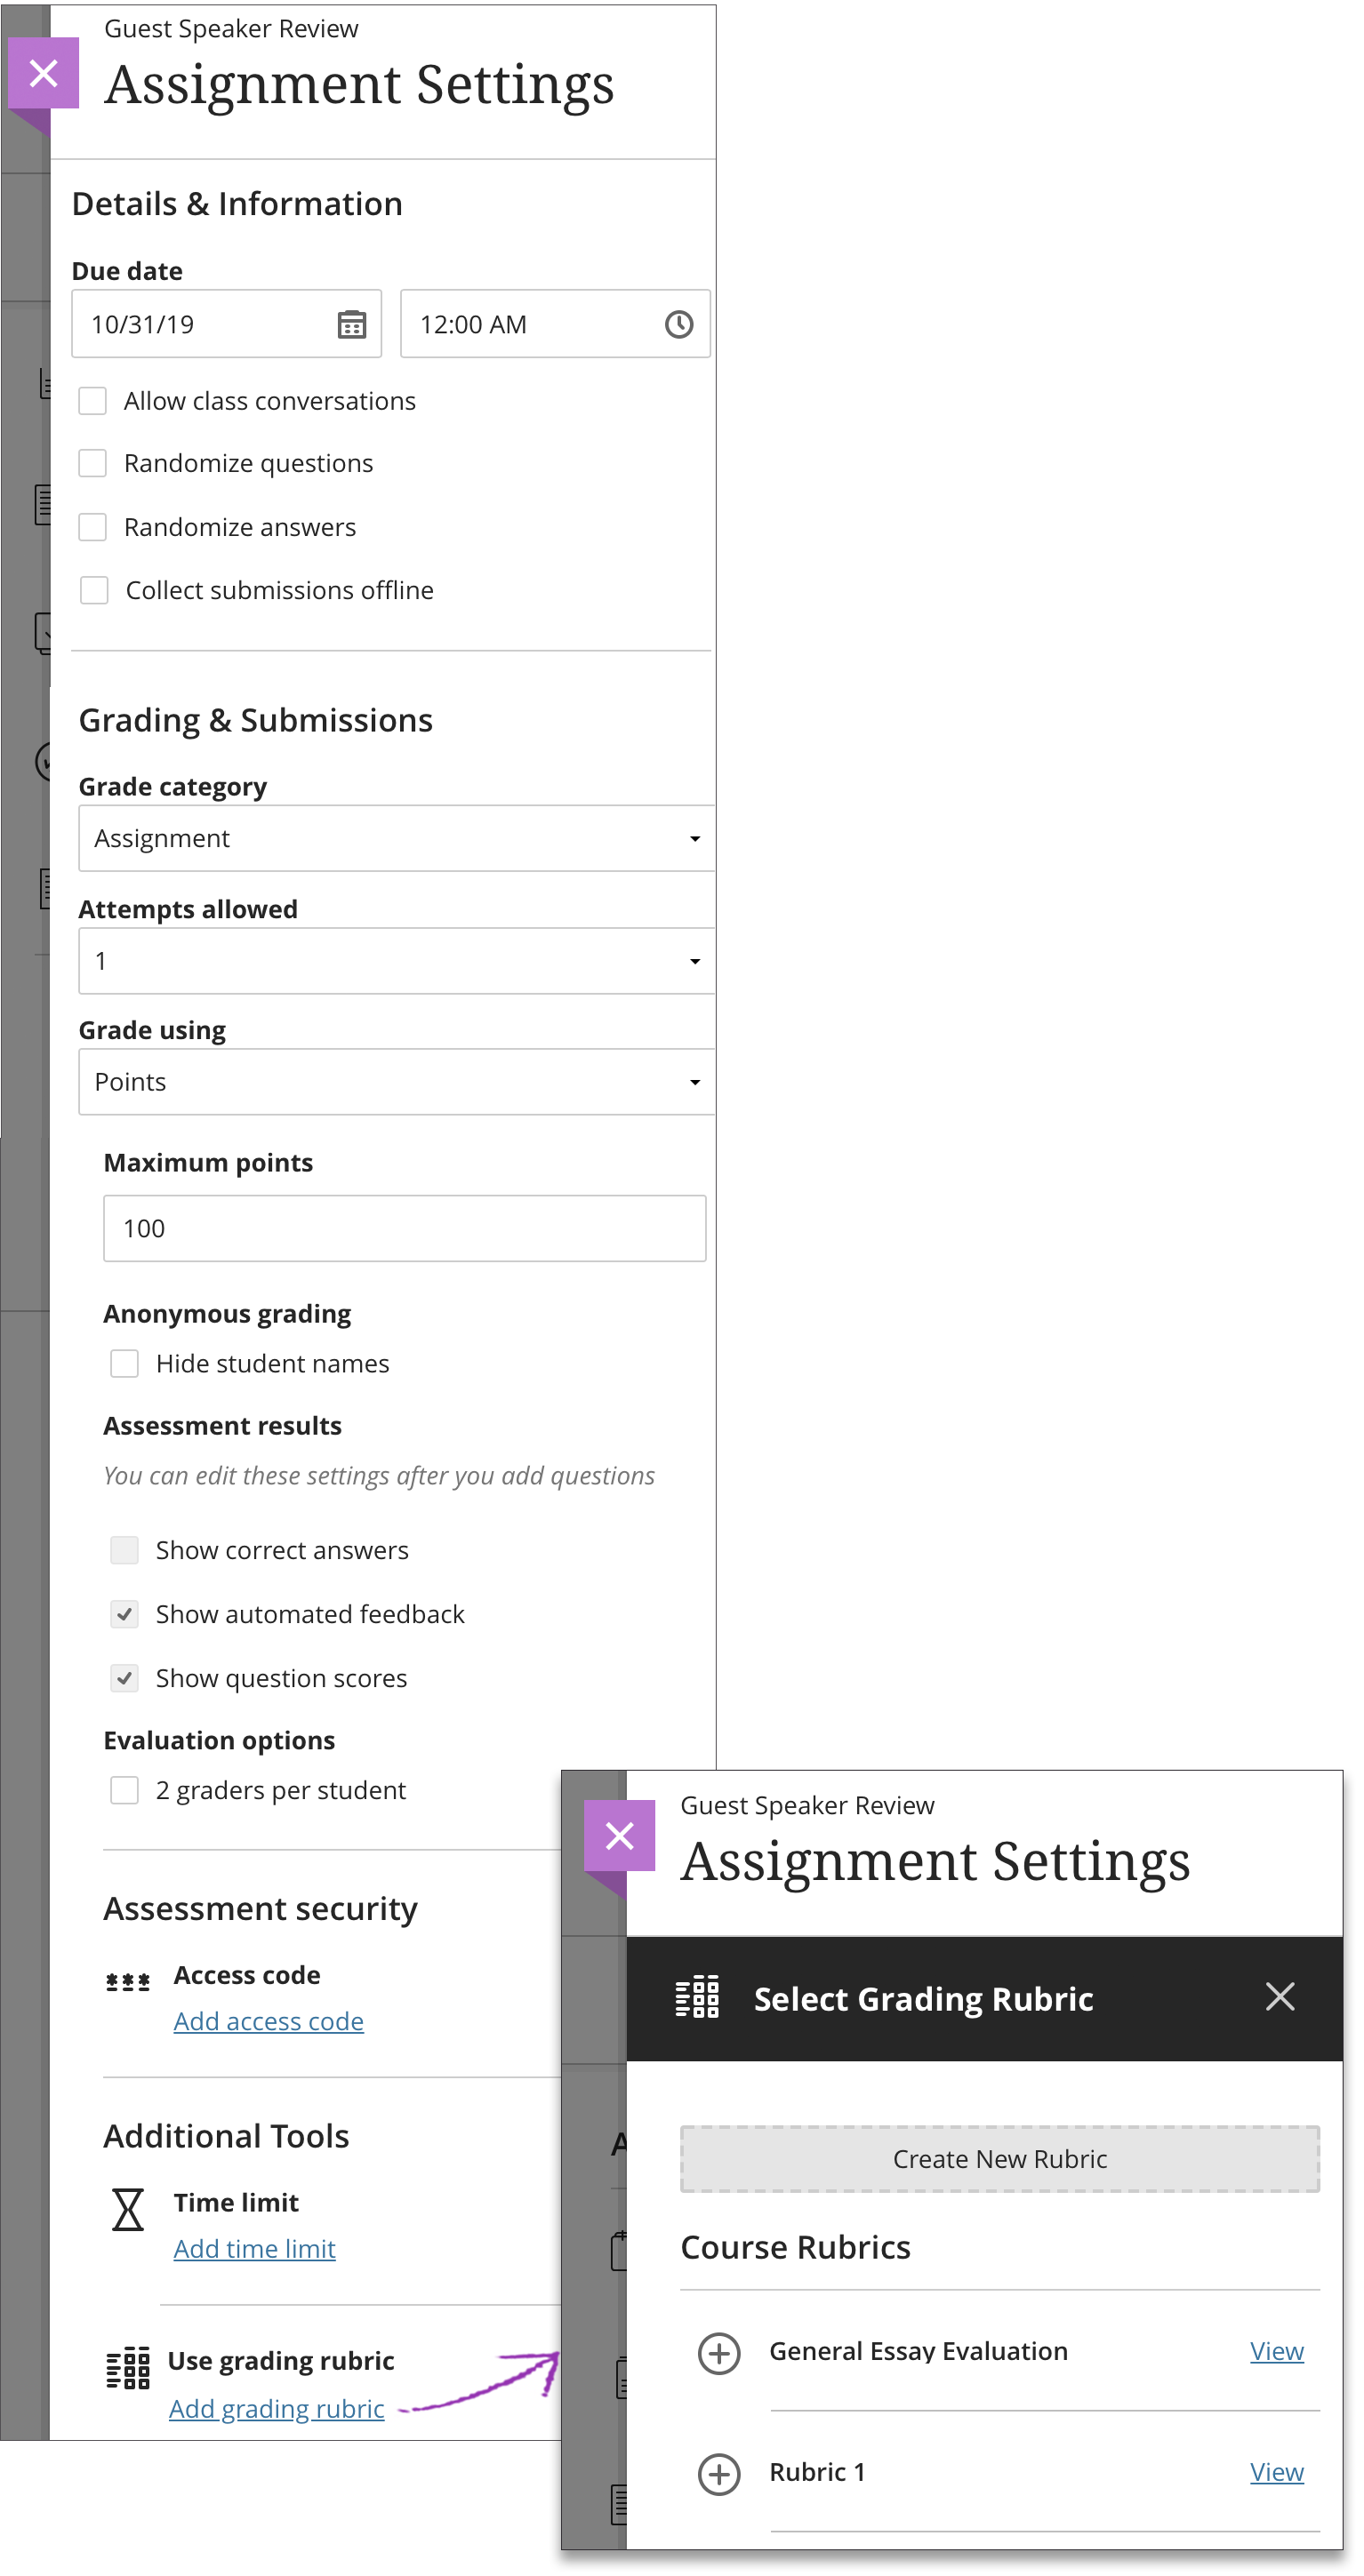 Add a grading rubric in your assignment settings.